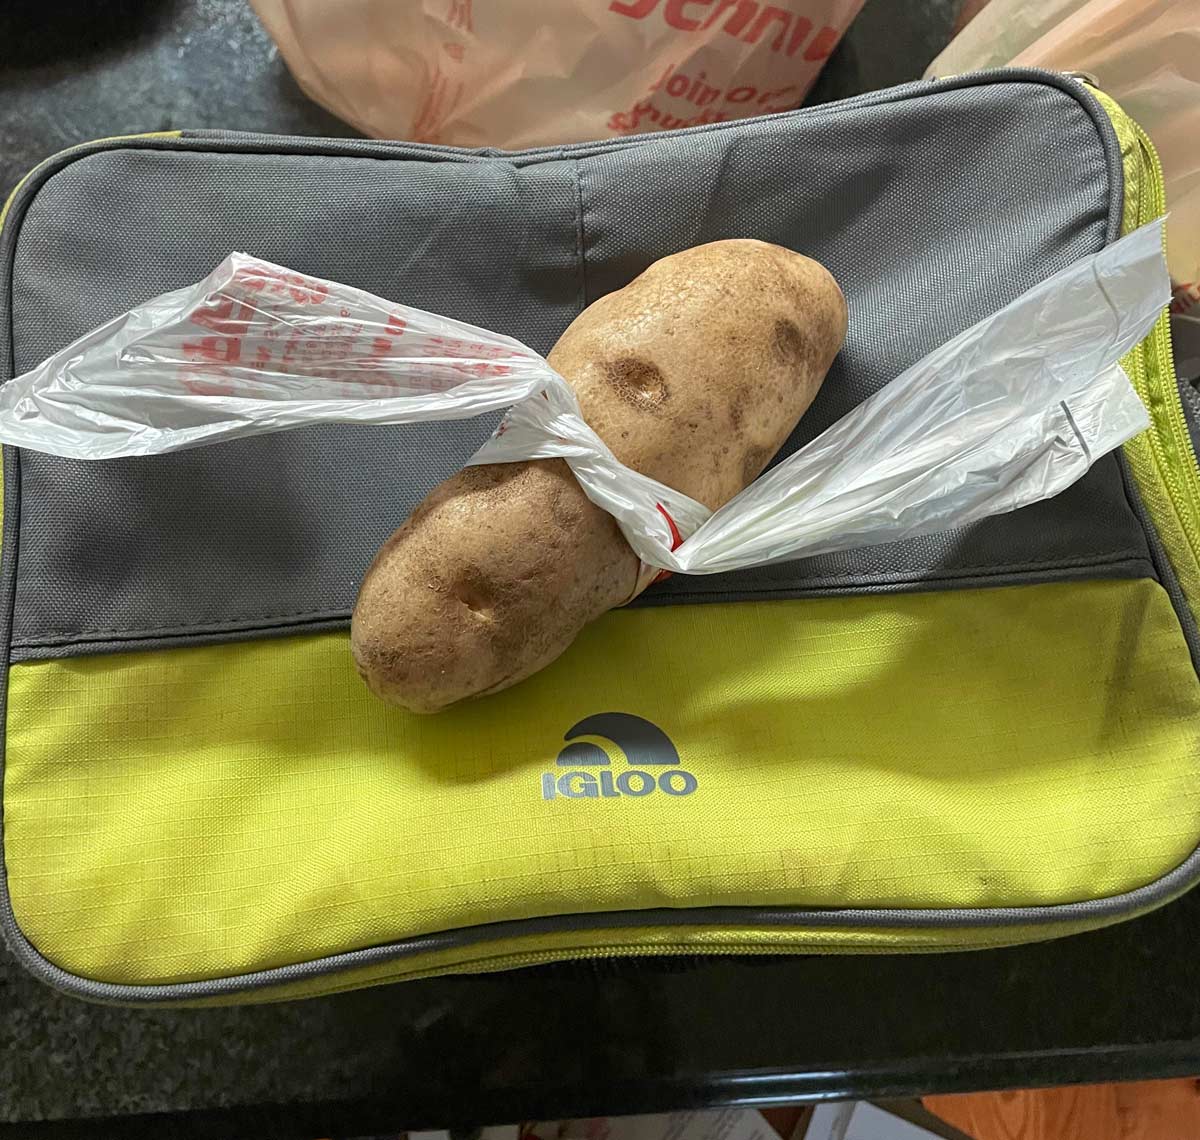 My wife couldn’t open the bag, so this was her solution when she bought the potato